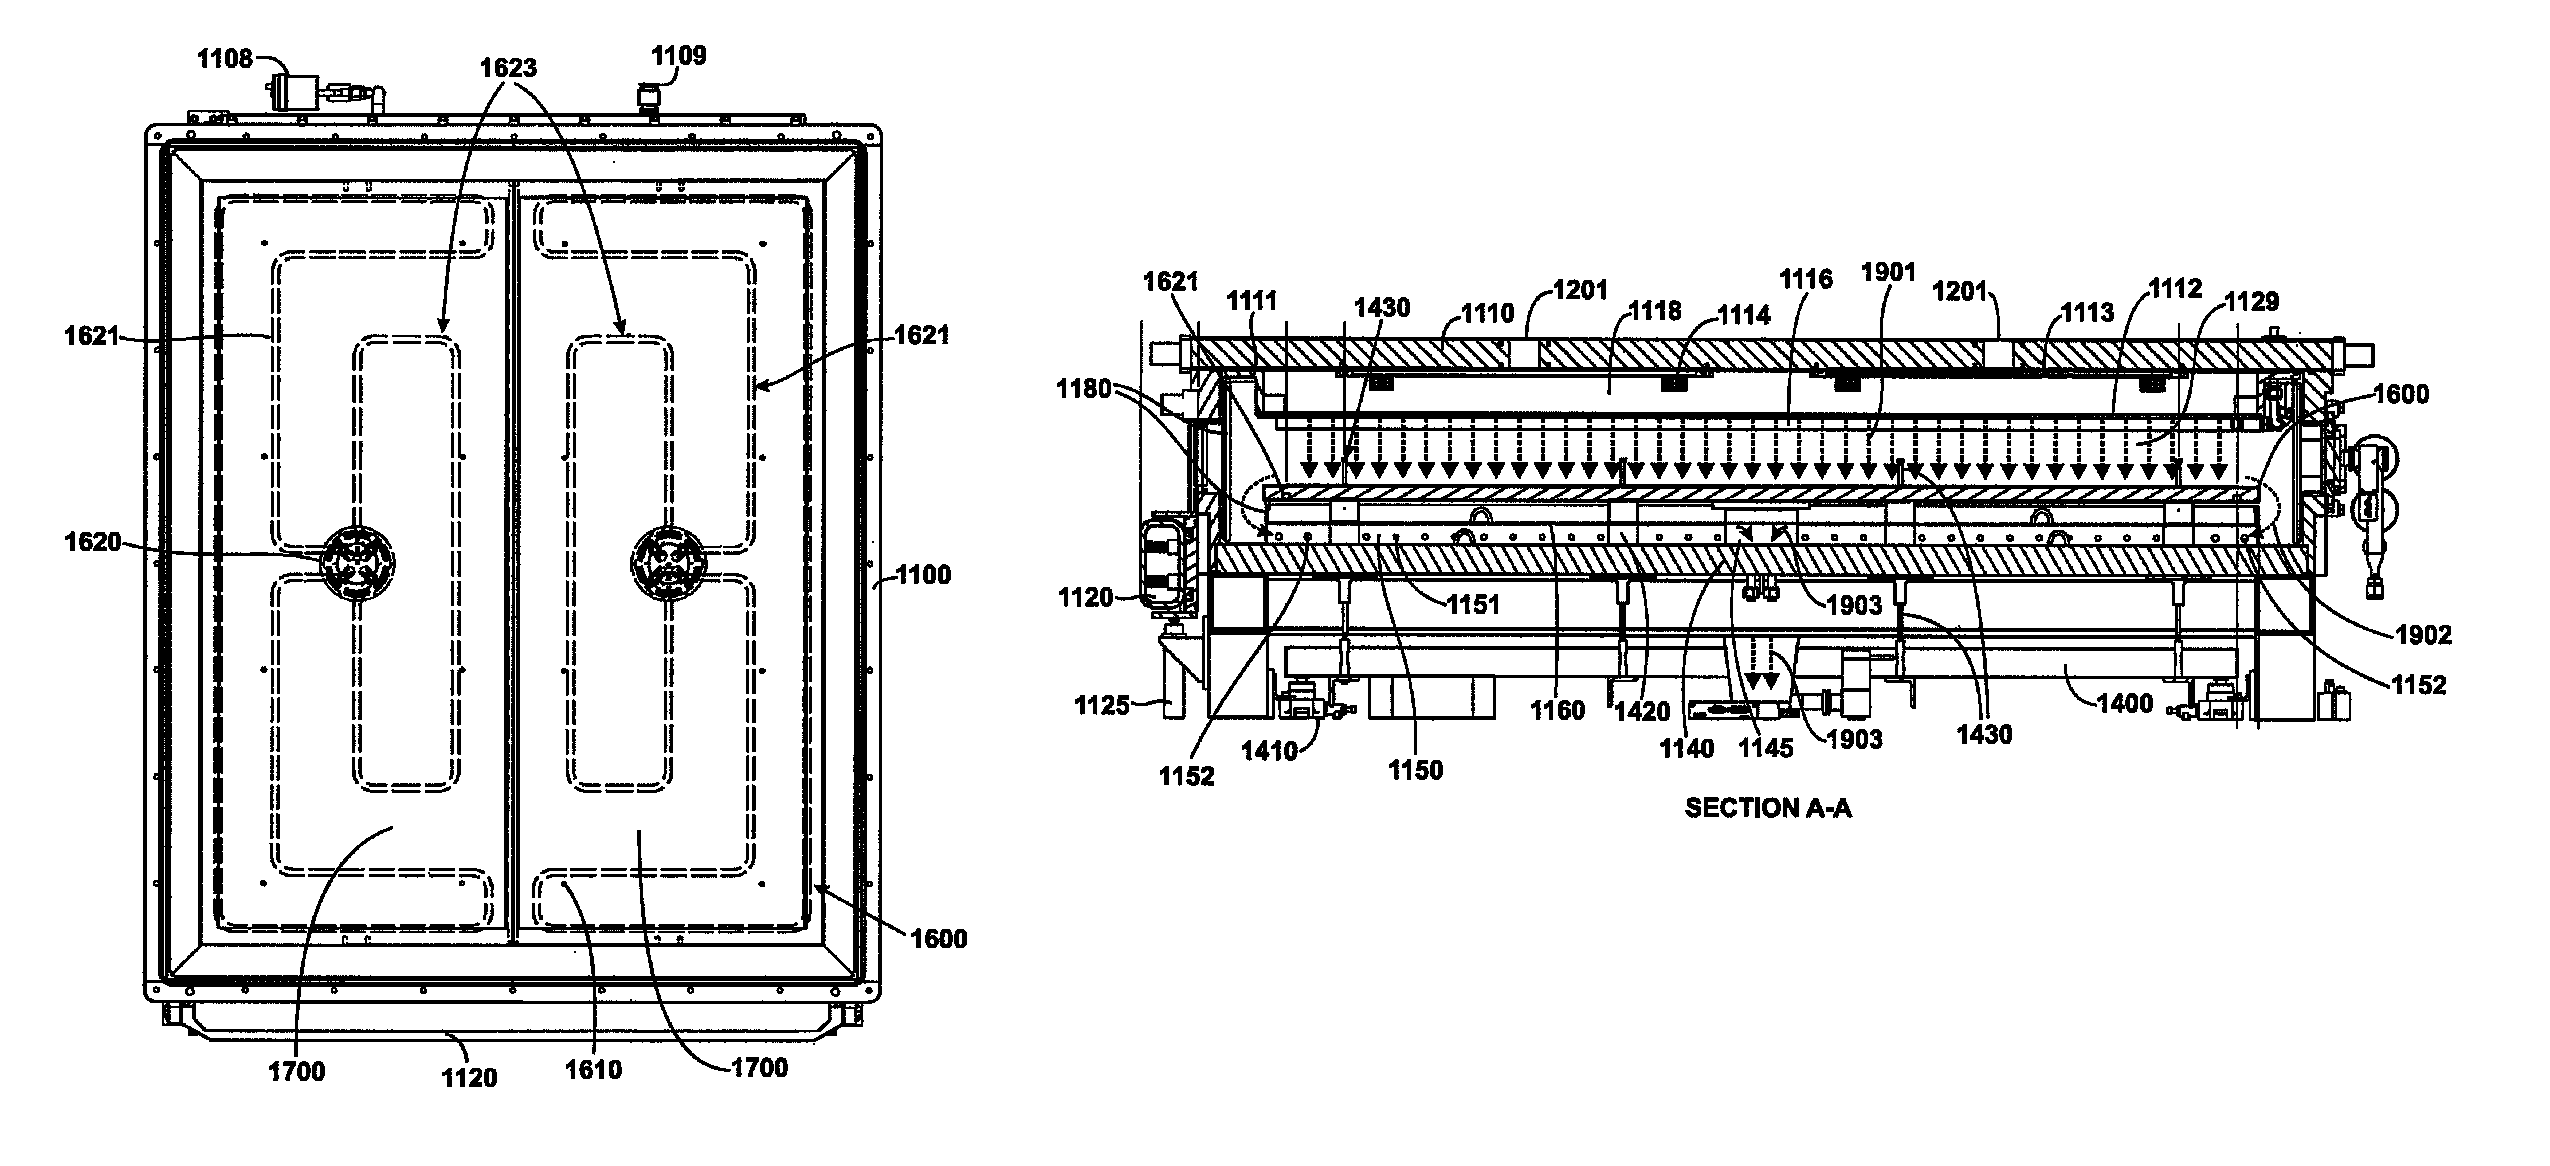 Large scale MOCVD system for thin film photovoltaic devices